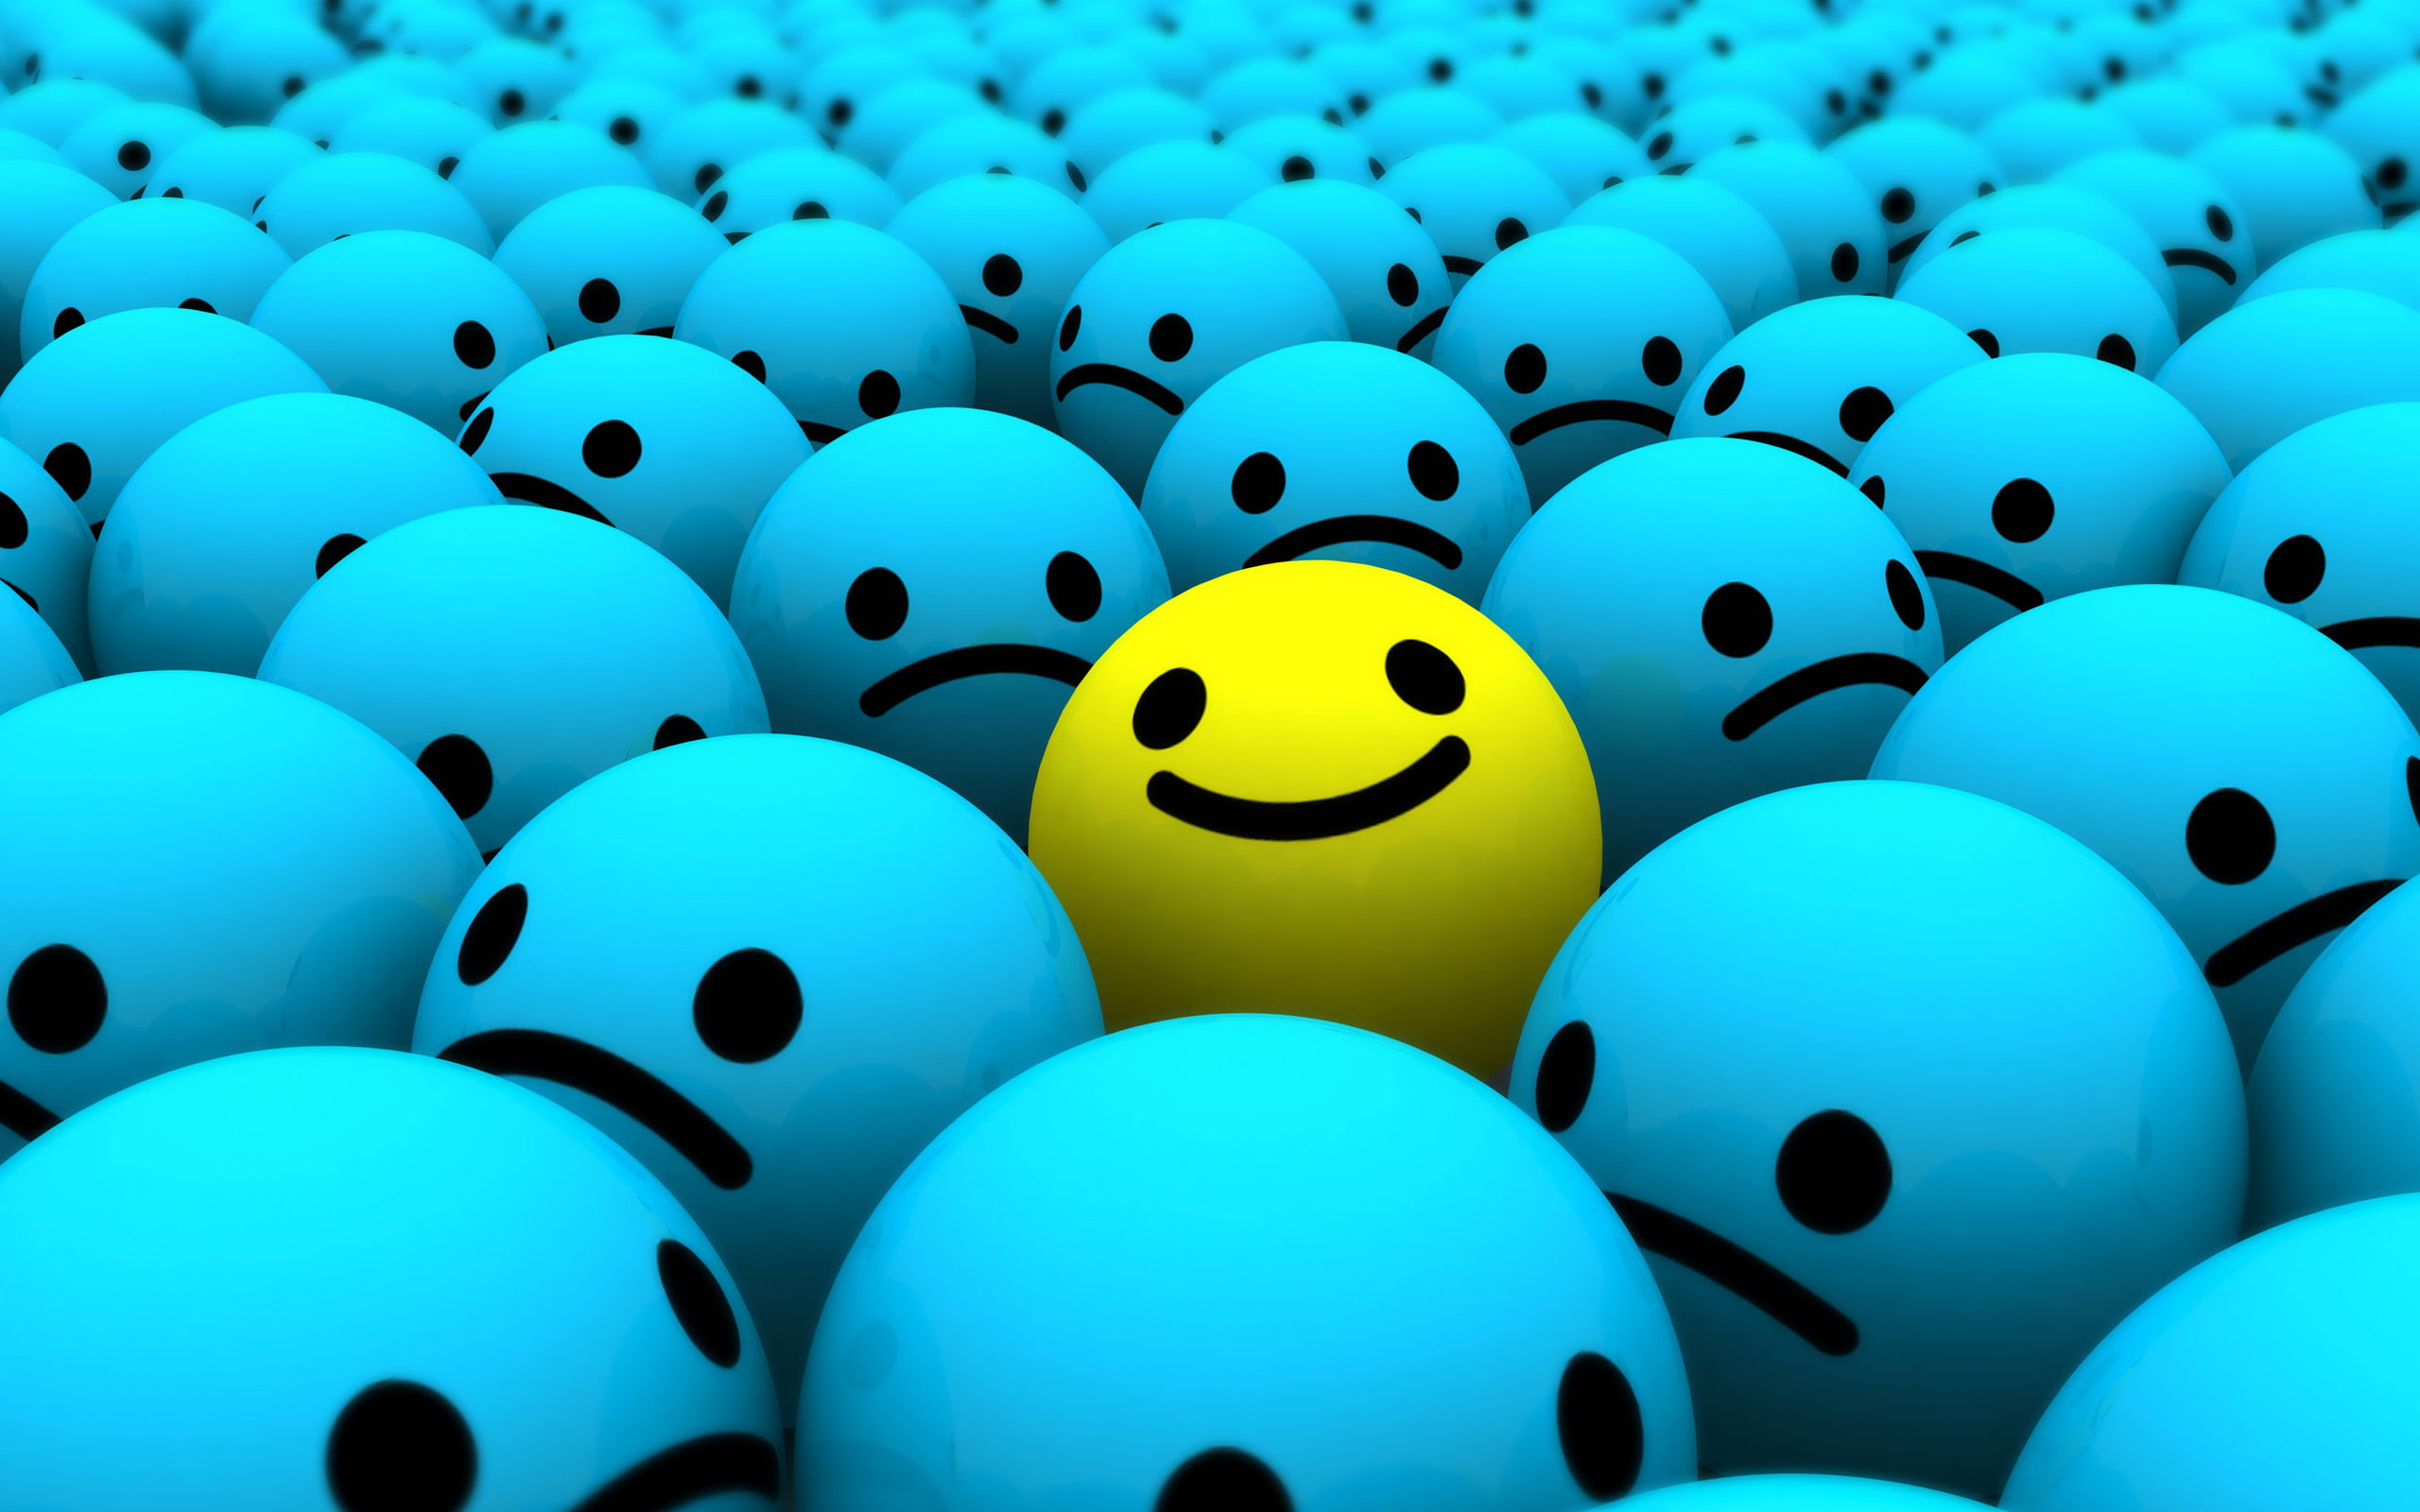 blue and yellow emoji digital wallpaper, Be different, Smilies